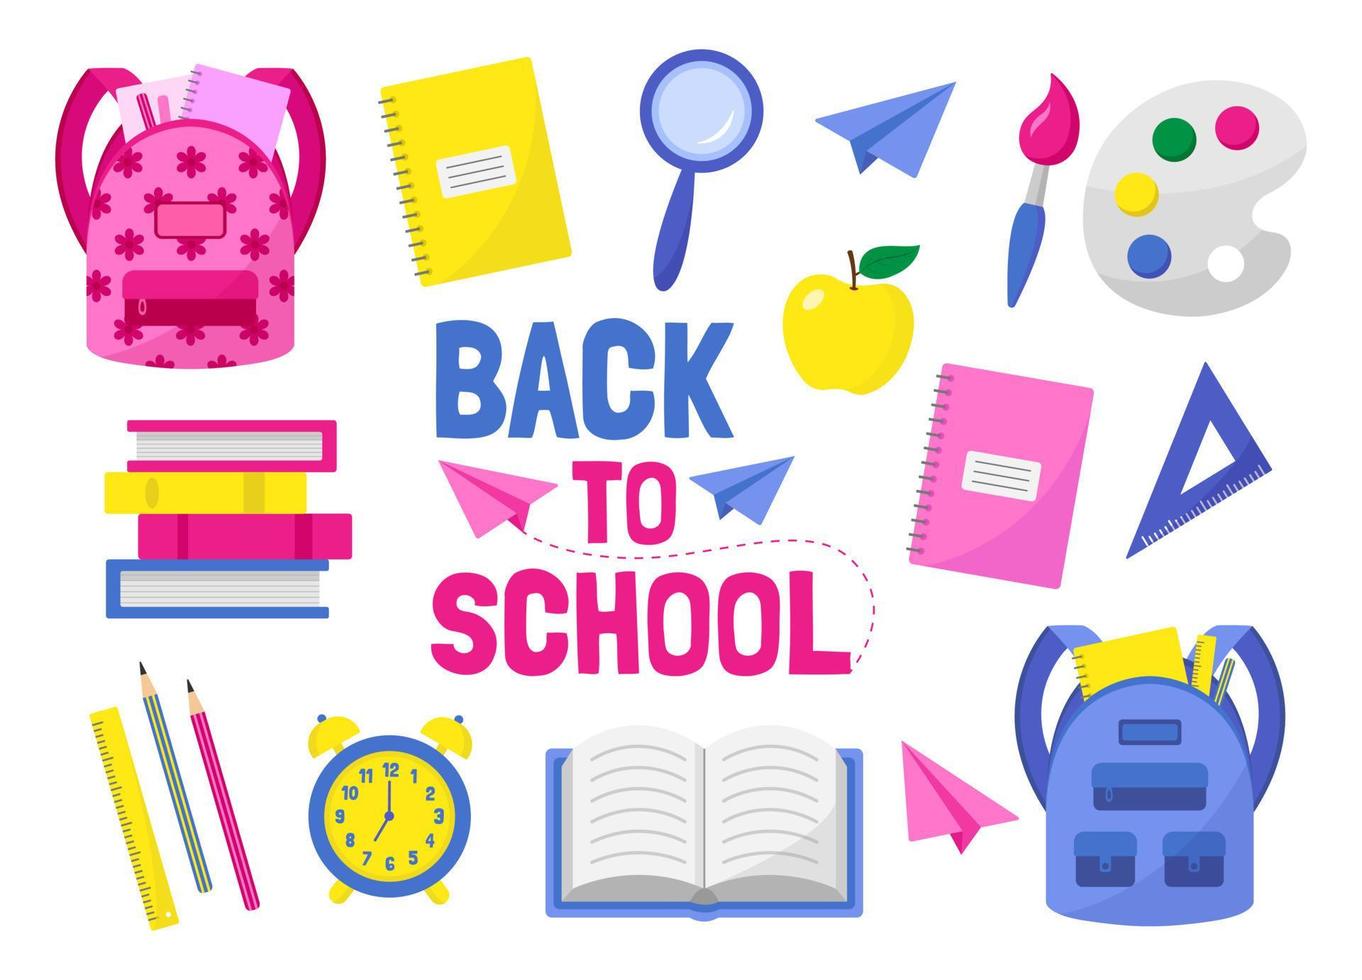 Back to school set of vector objects -  backpack, alarm clock, notebook, pencil, ruler, paper airplane, apple, magnifier, books, art palette and paint brush.